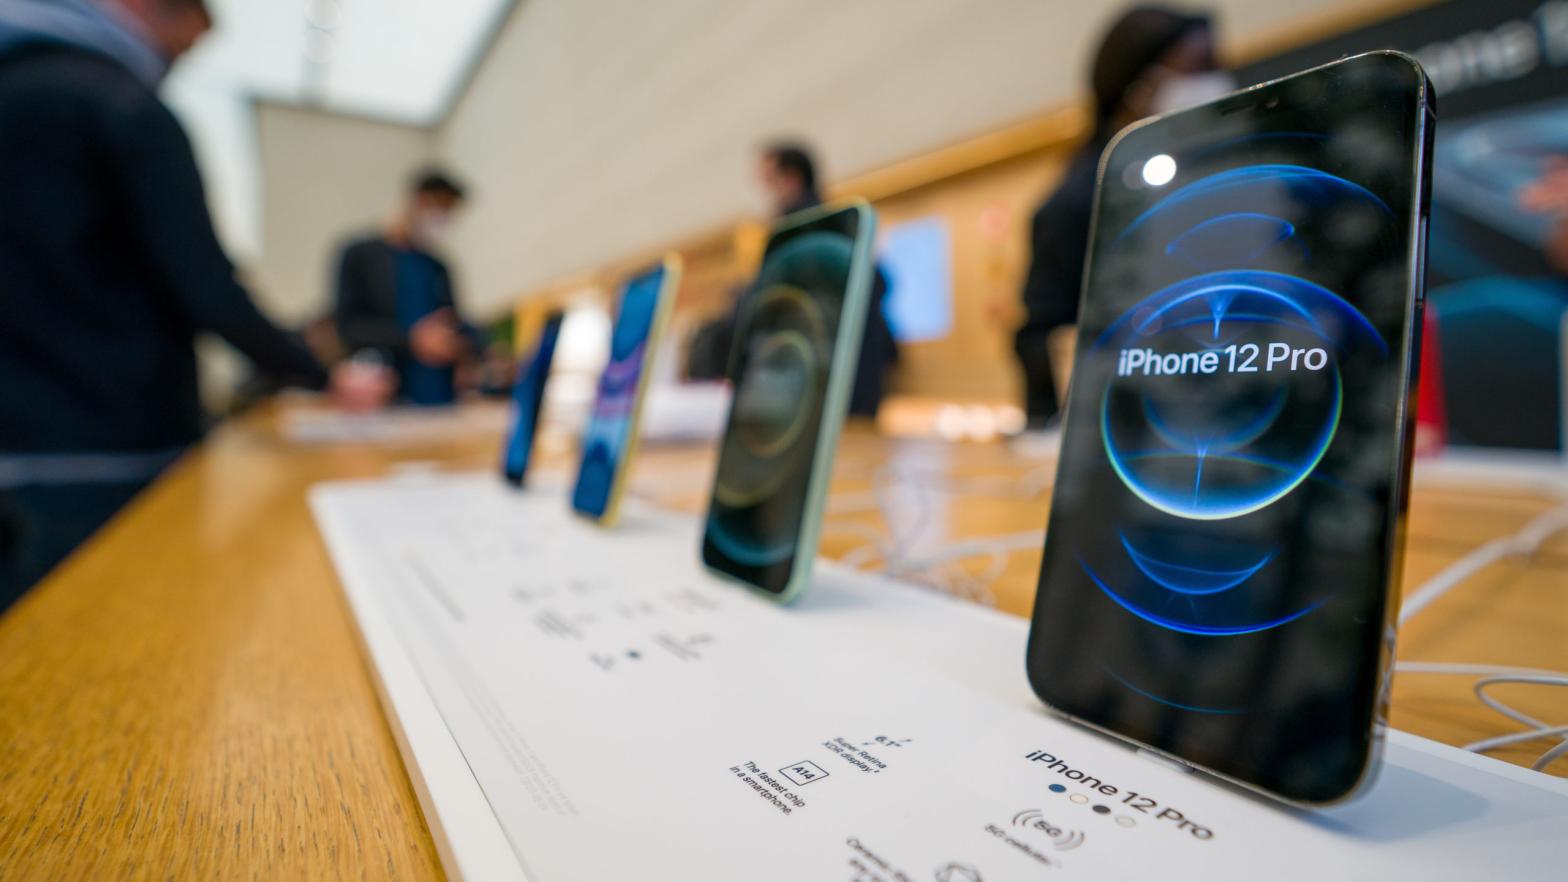 The new iPhone 12 and iPhone 12 Pro on display during launch day on October 23, 2020 in London, England.  (Photo: Ming Yeung, Getty Images)